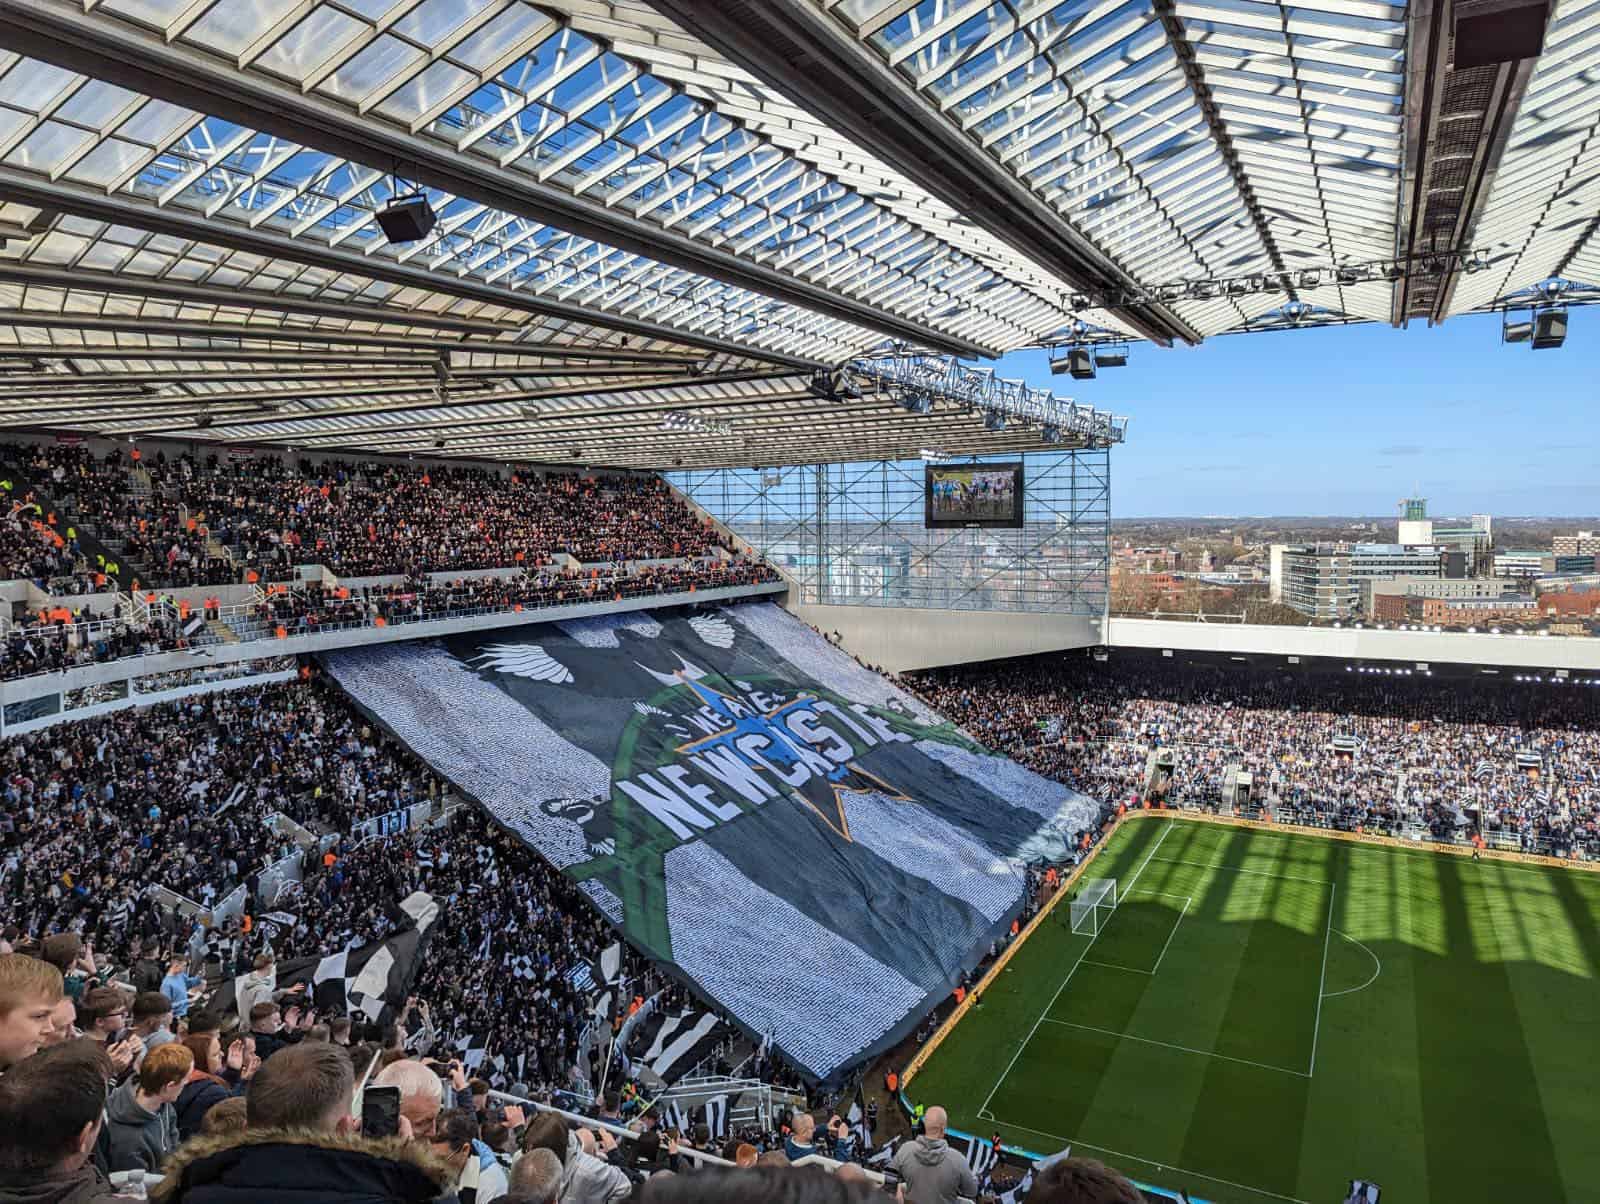 Best things to do in Newcastle UK - Paul McDougal - St James Park where Newcastle United Football Club plays